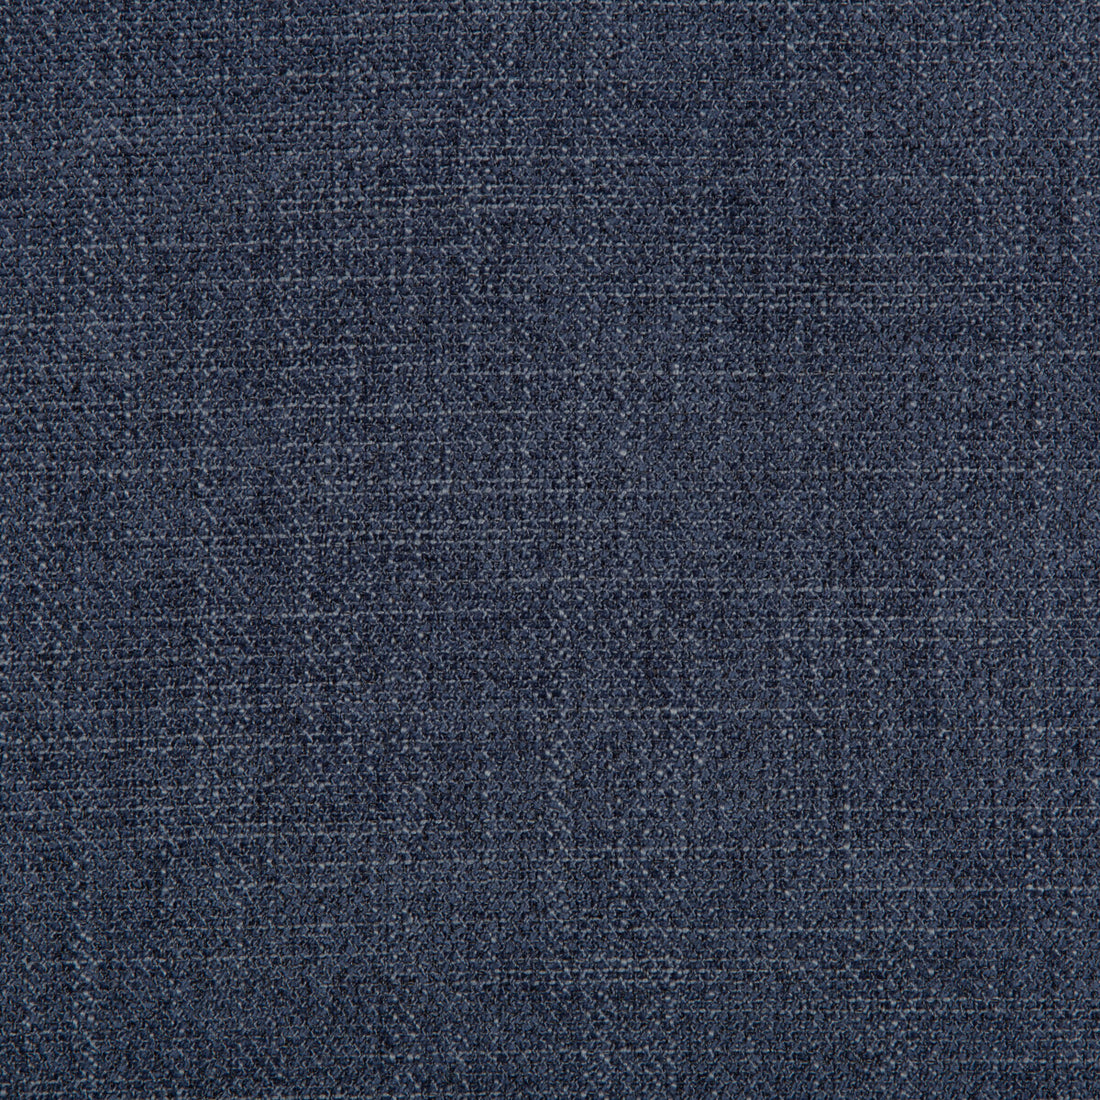 Kf Smt fabric - pattern 35390.5.0 - by Kravet Smart in the Performance Crypton Home collection